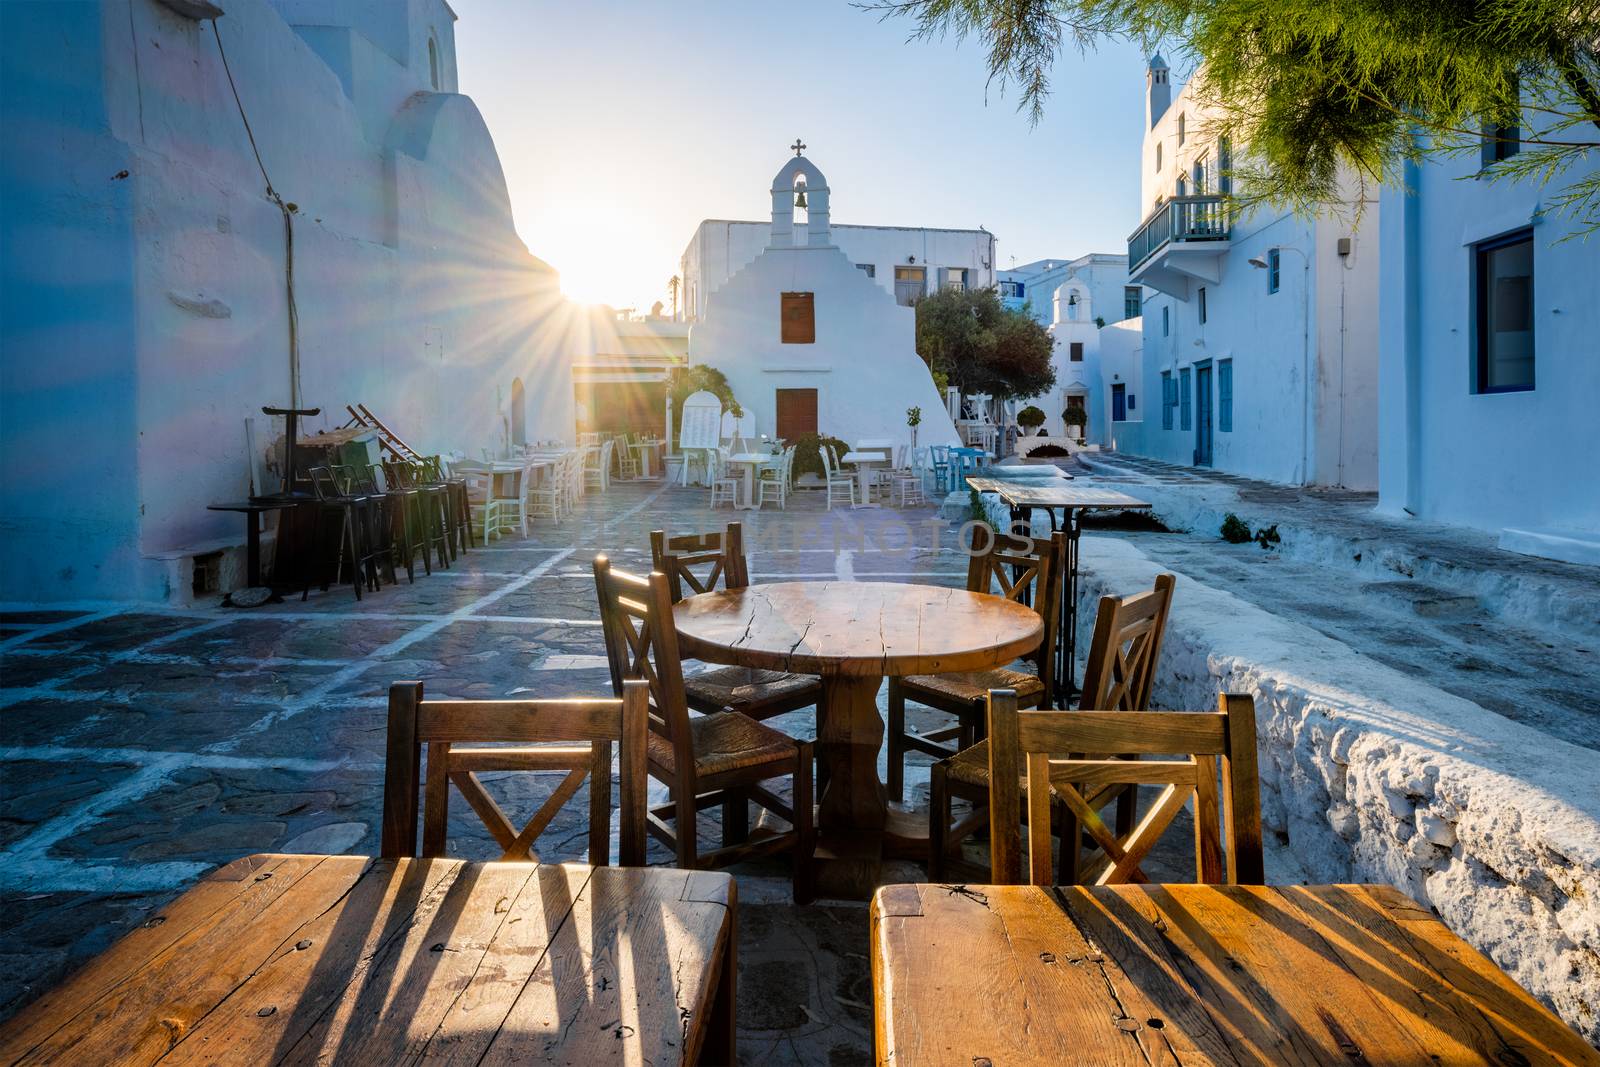 Tourist Greece scene - restaurant cafe table in picturesque scenic narrow streets with traditional whitewashed houses blue doors windows Chora town in famous tourist attraction Mykonos island, Greece